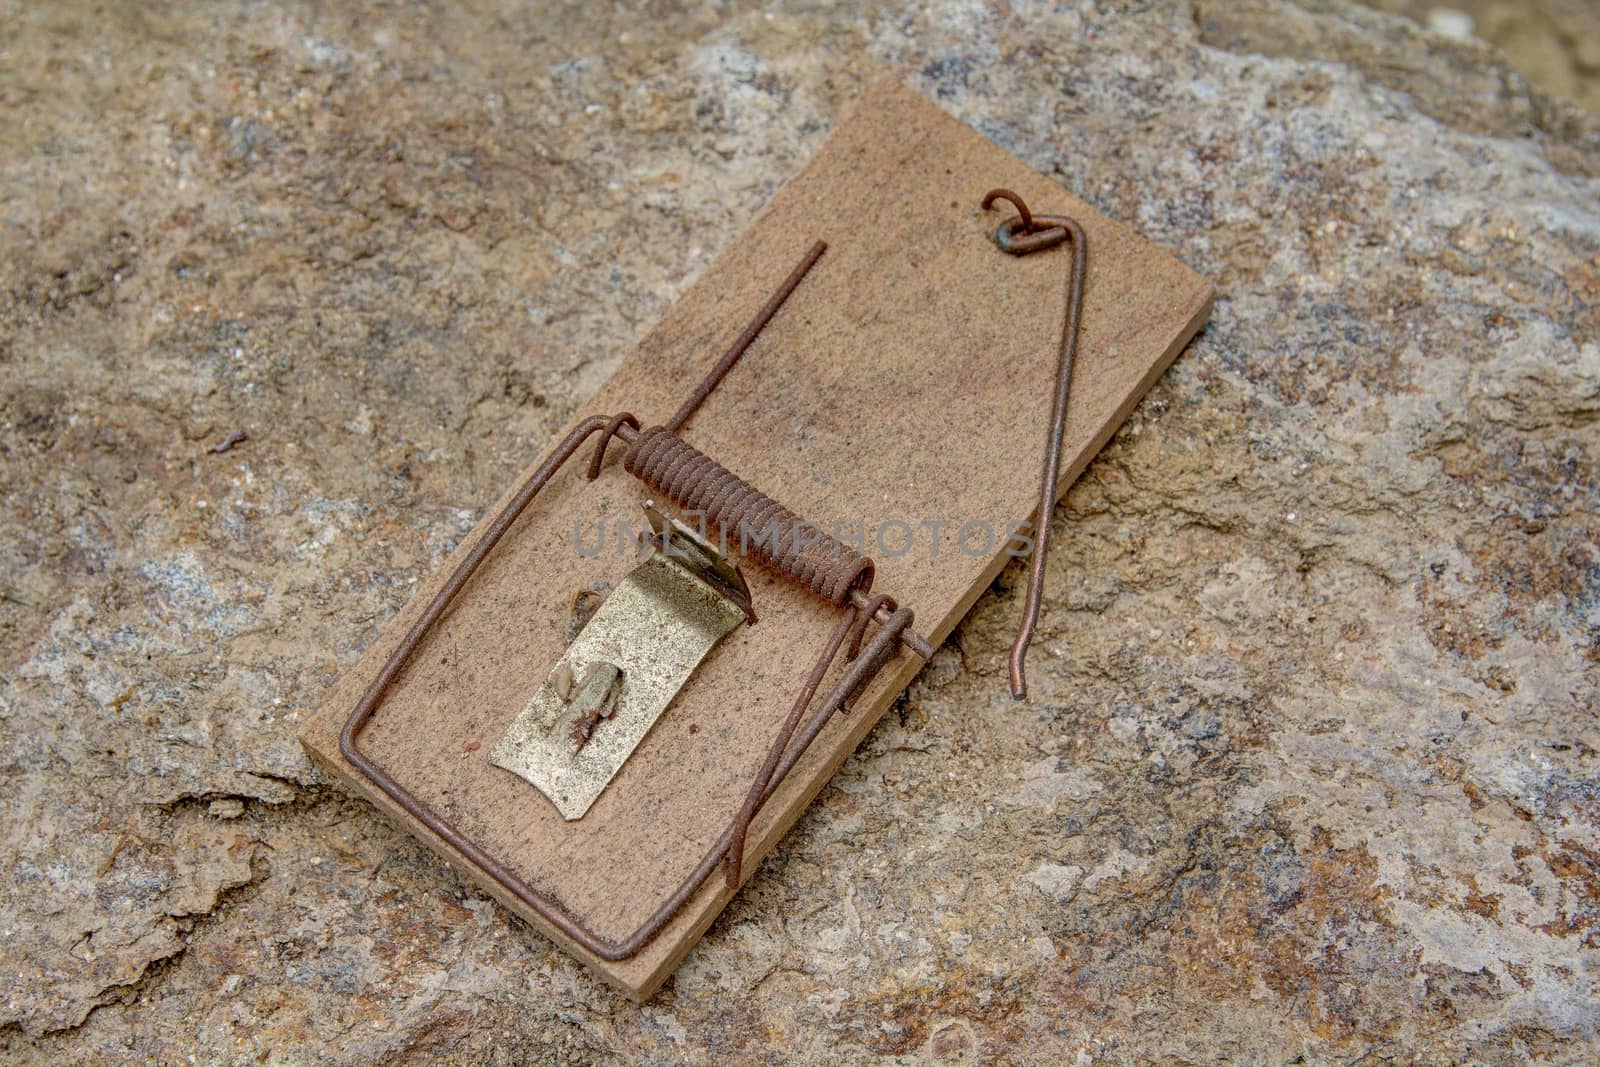 Photo shows closeup details of an old mousetrap.